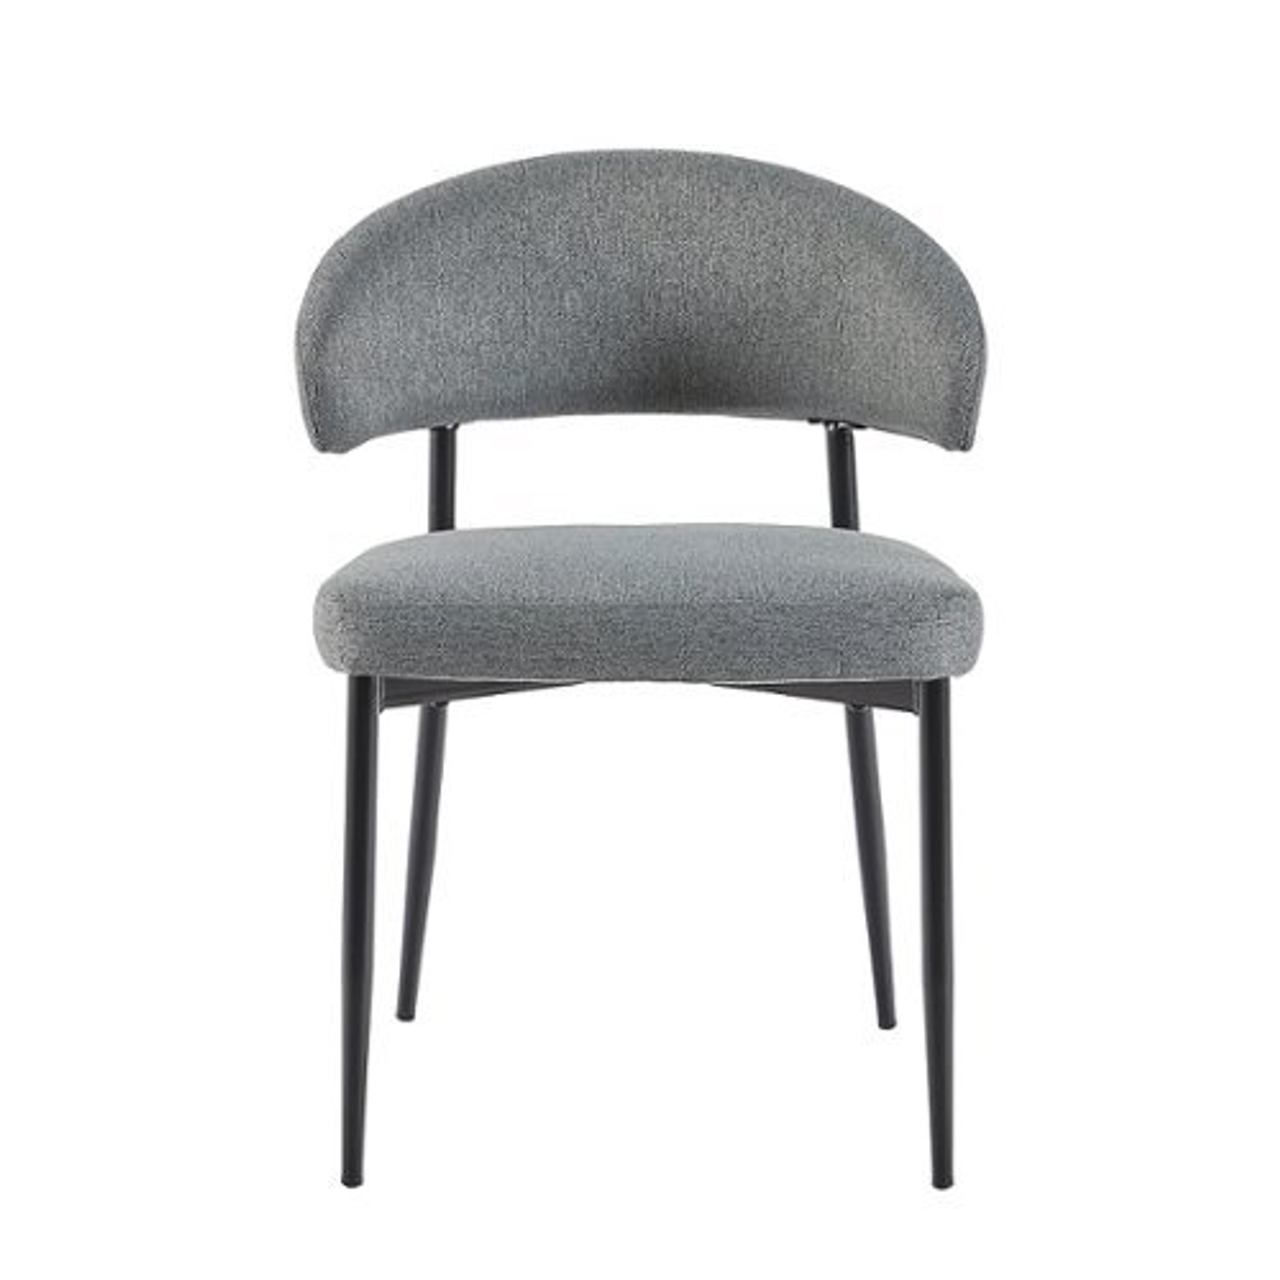 Walker Edison - Modern Curved Back Upholstered Dining Chair (2-Piece Set) - Charcoal